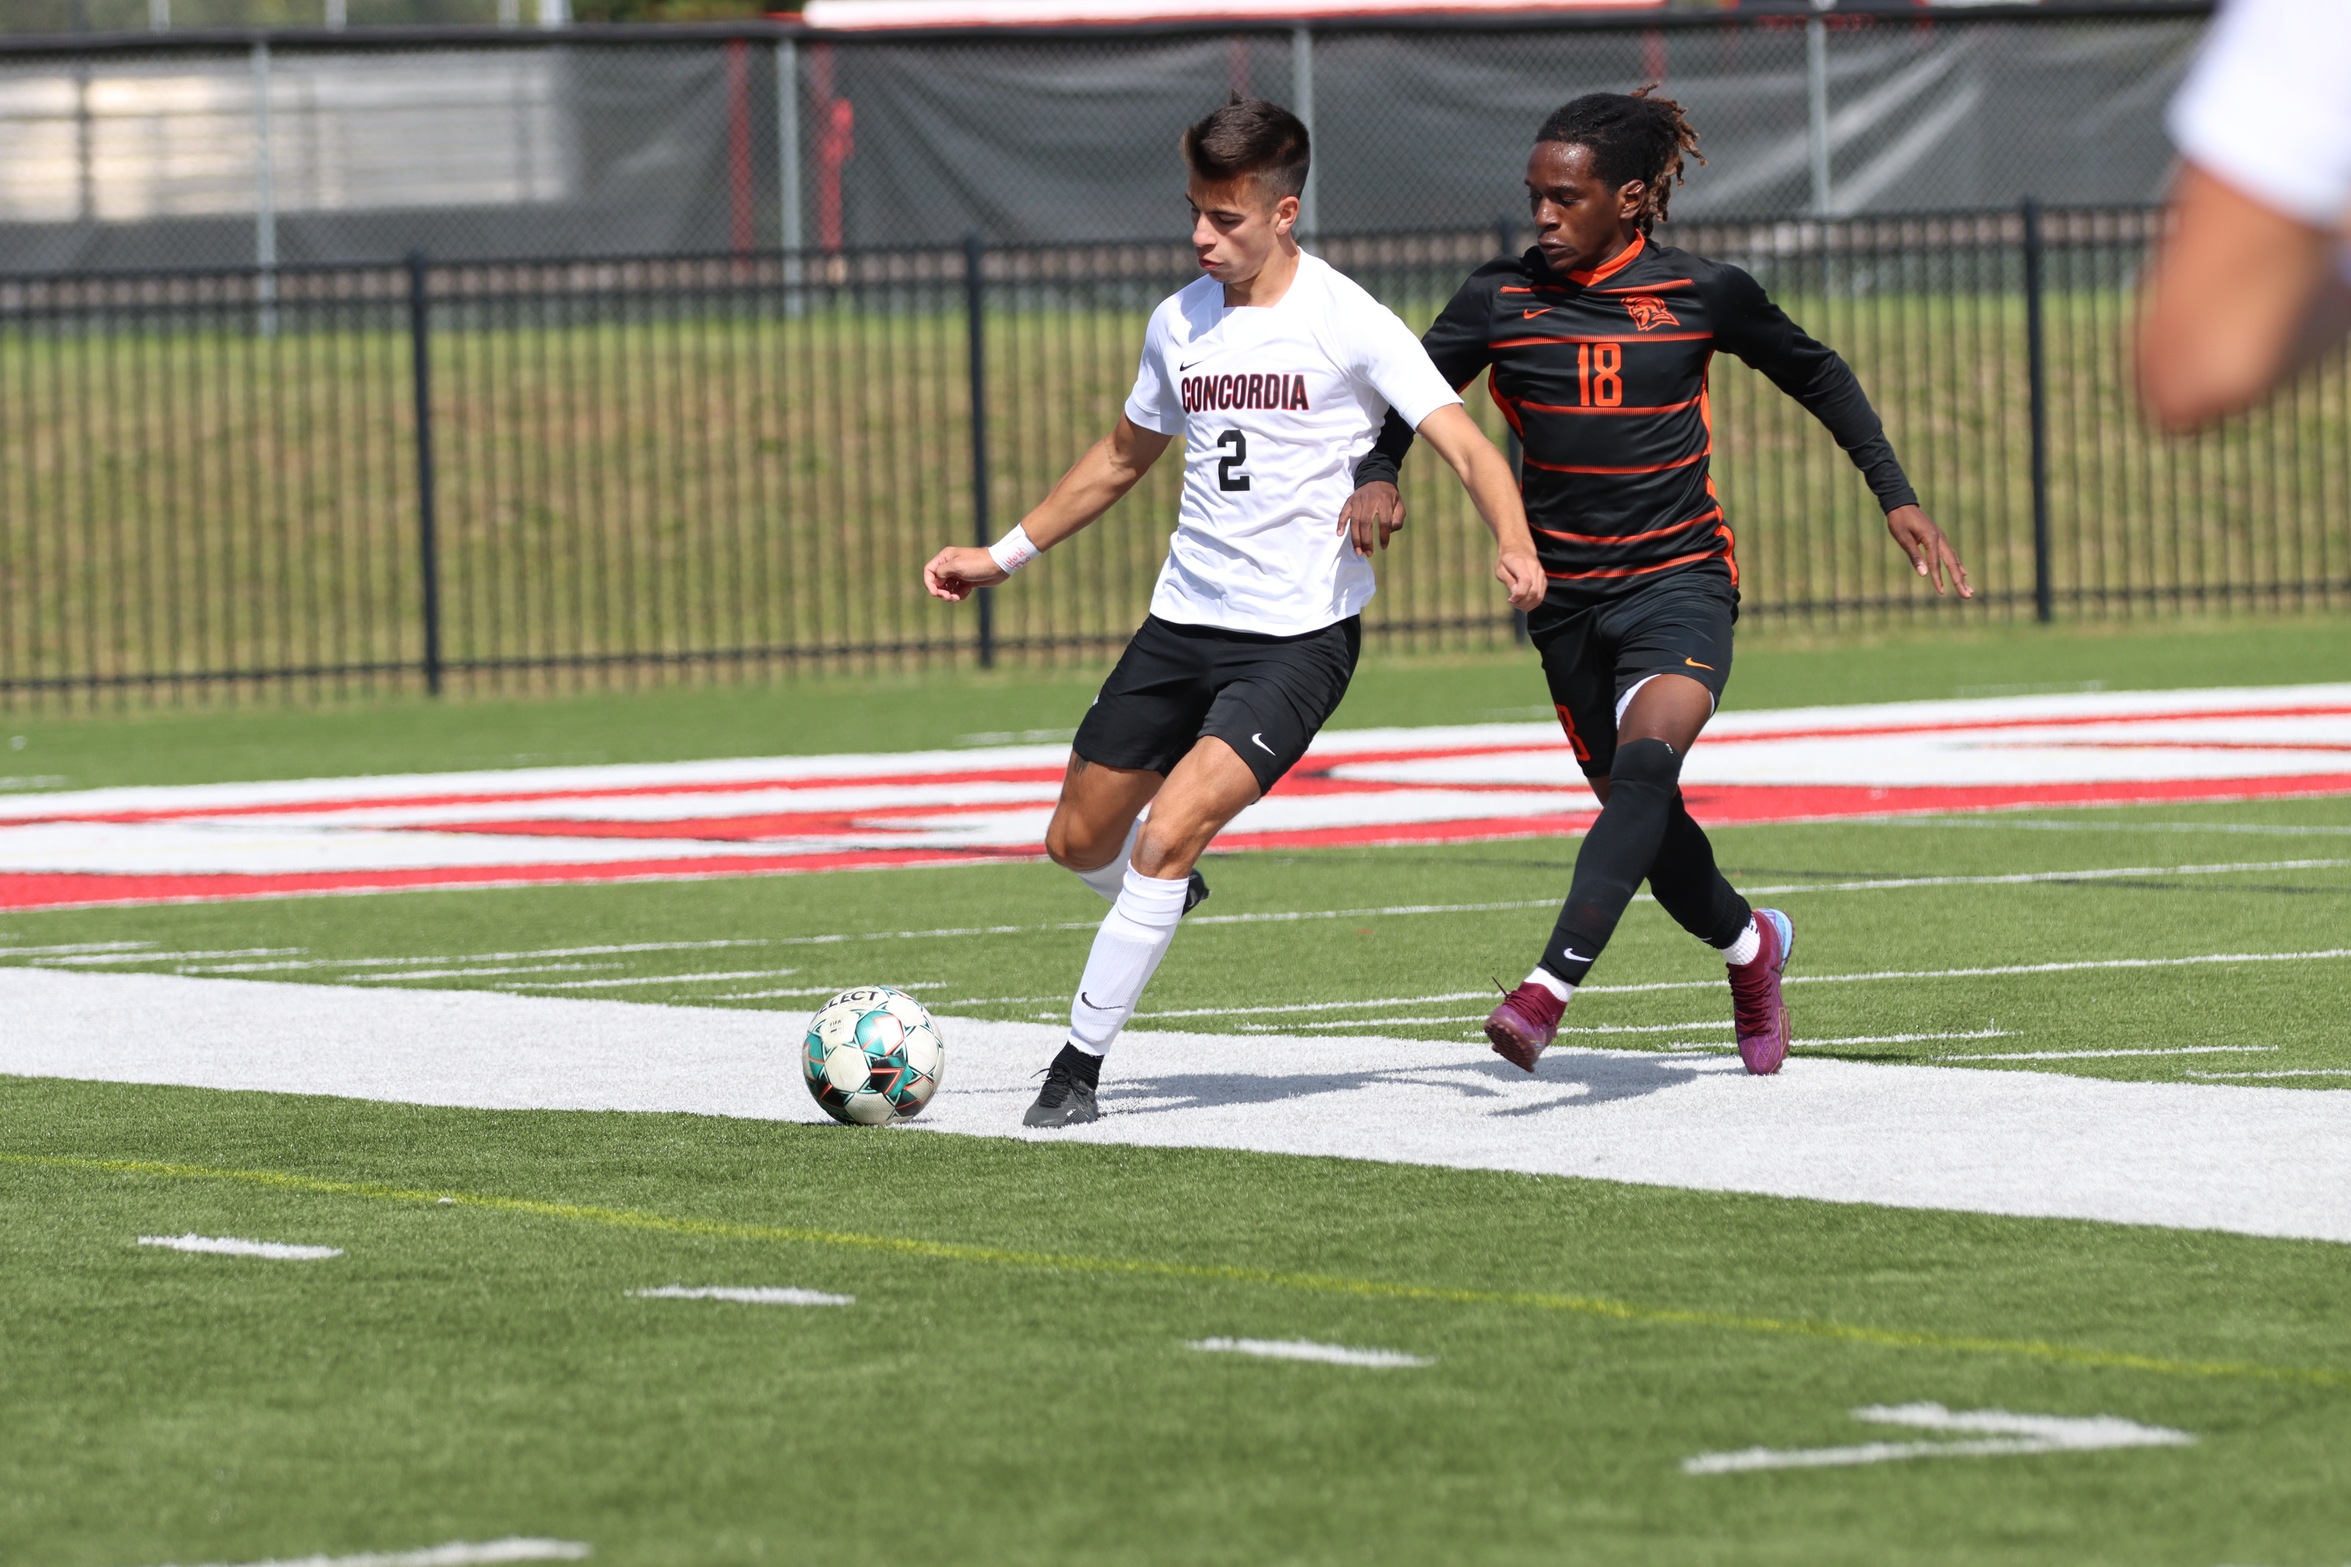 Men's Soccer falls in close 1-0 match at Cleary